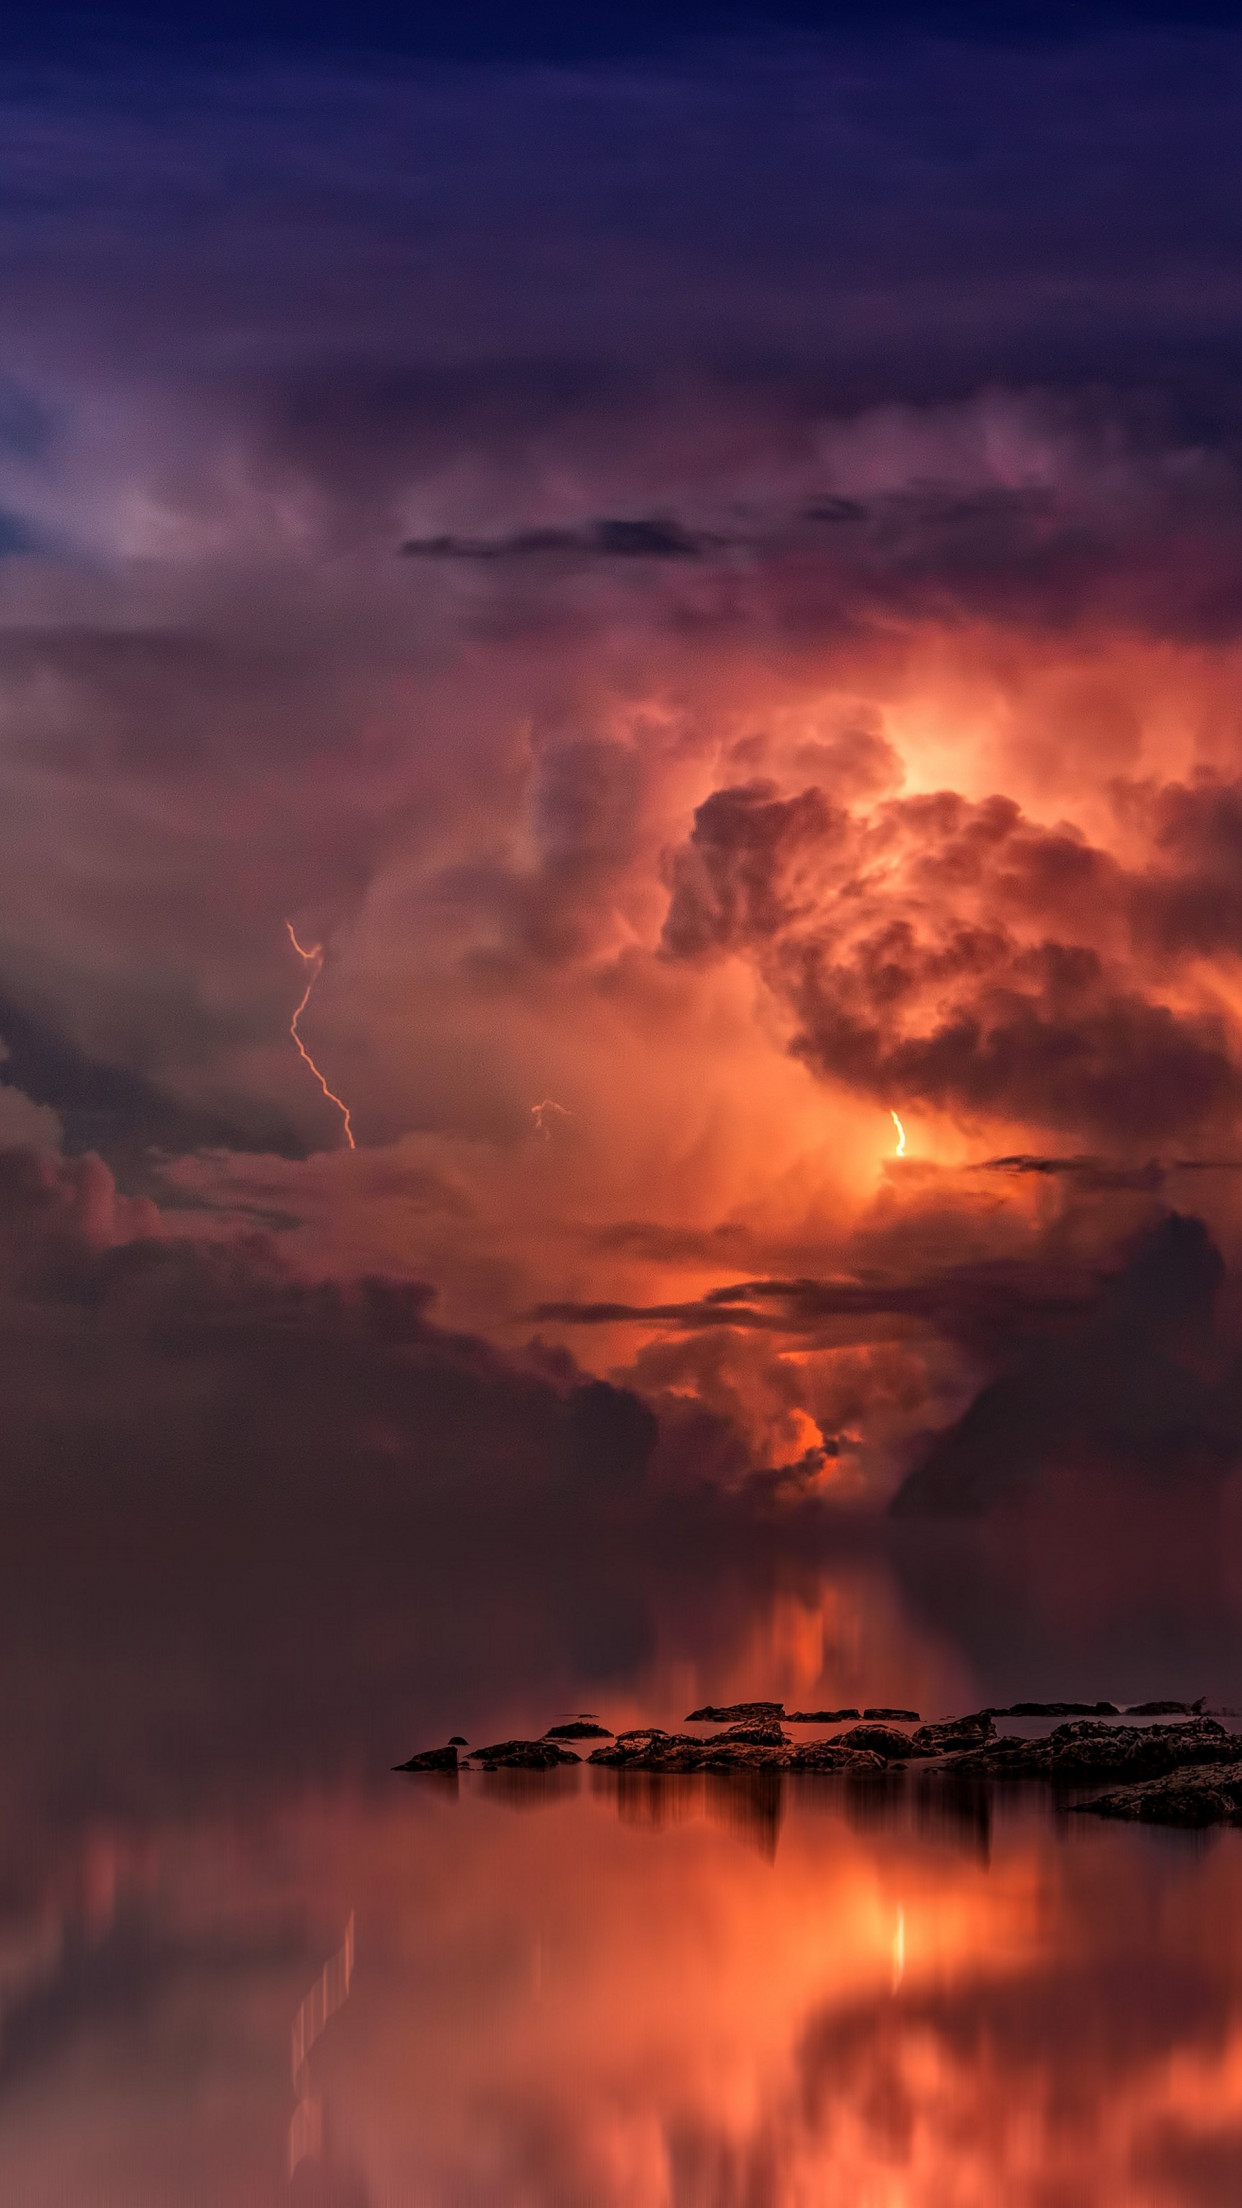 Lightning and thunderstorm in the sky wallpaper 1242x2208